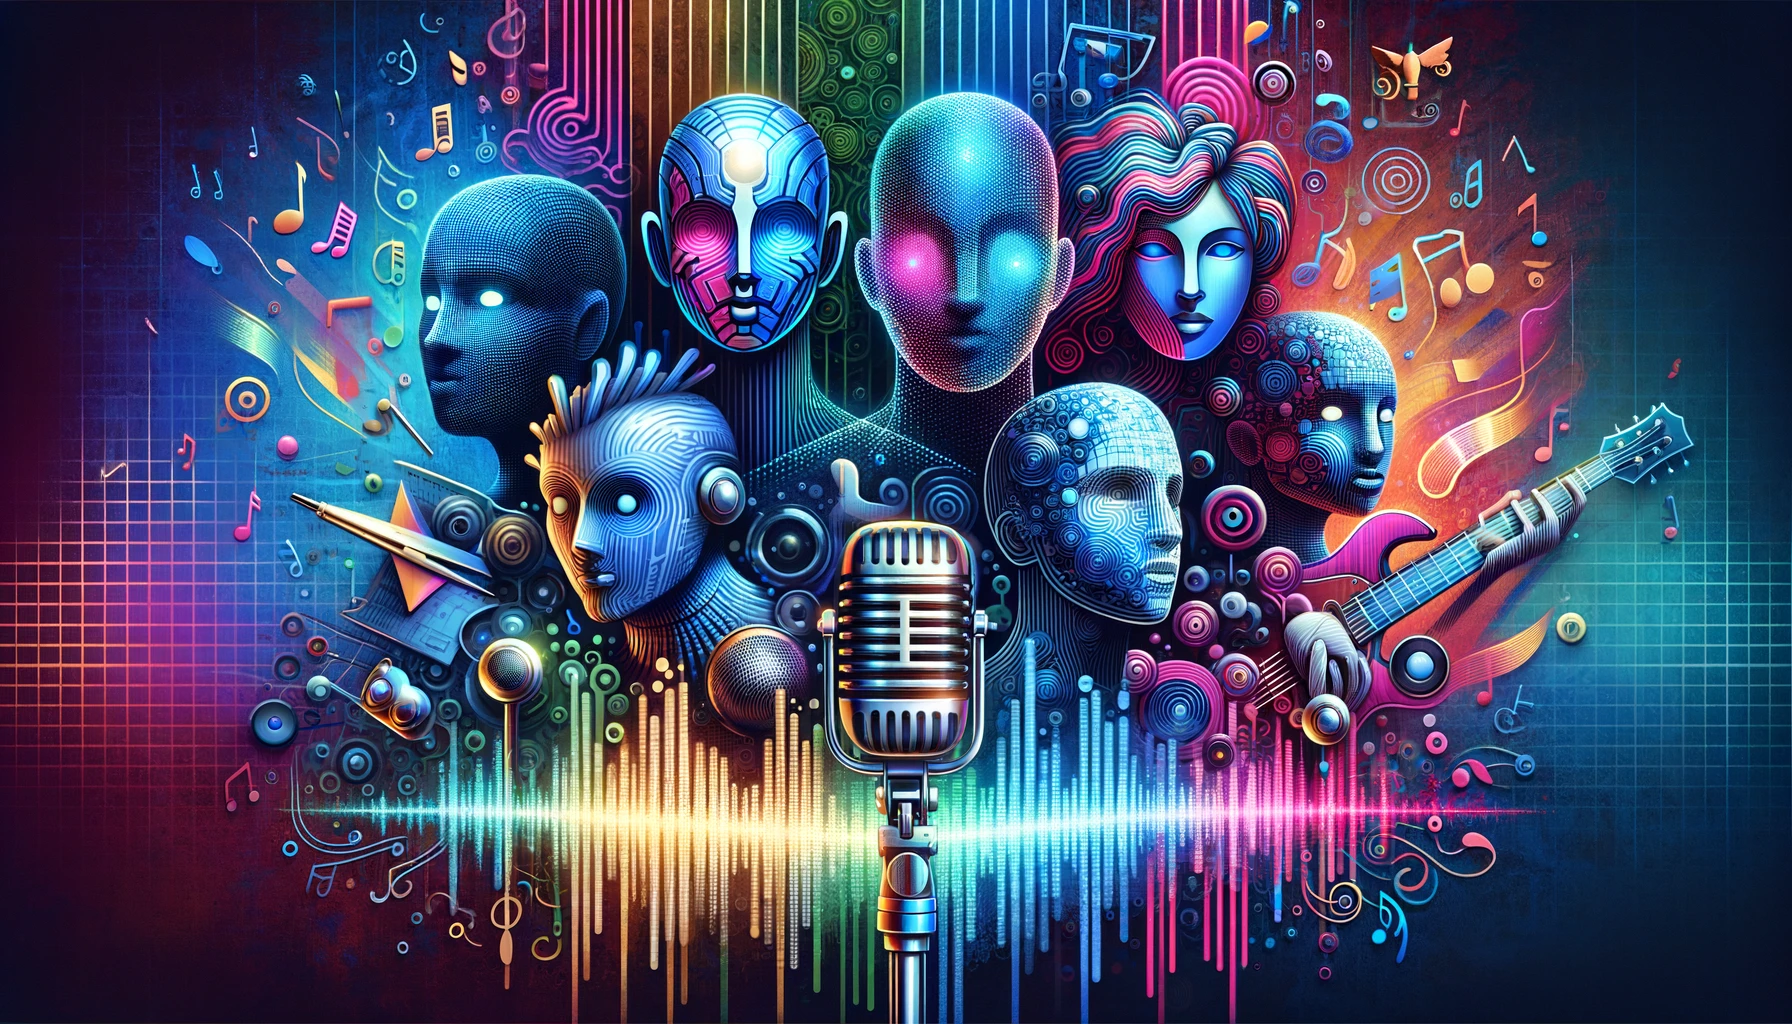 A horizontal cover image for a blog about AI singers, rappers, original AI voices, and AI character voices. The image is abstract, featuring elements like digital waveforms, abstract humanoid figures with microphones, musical notes, and representations of characters with distinct voices. The background is futuristic and vibrant with bright, contrasting colors, emphasizing the creative and innovative nature of AI in the music and entertainment industry.